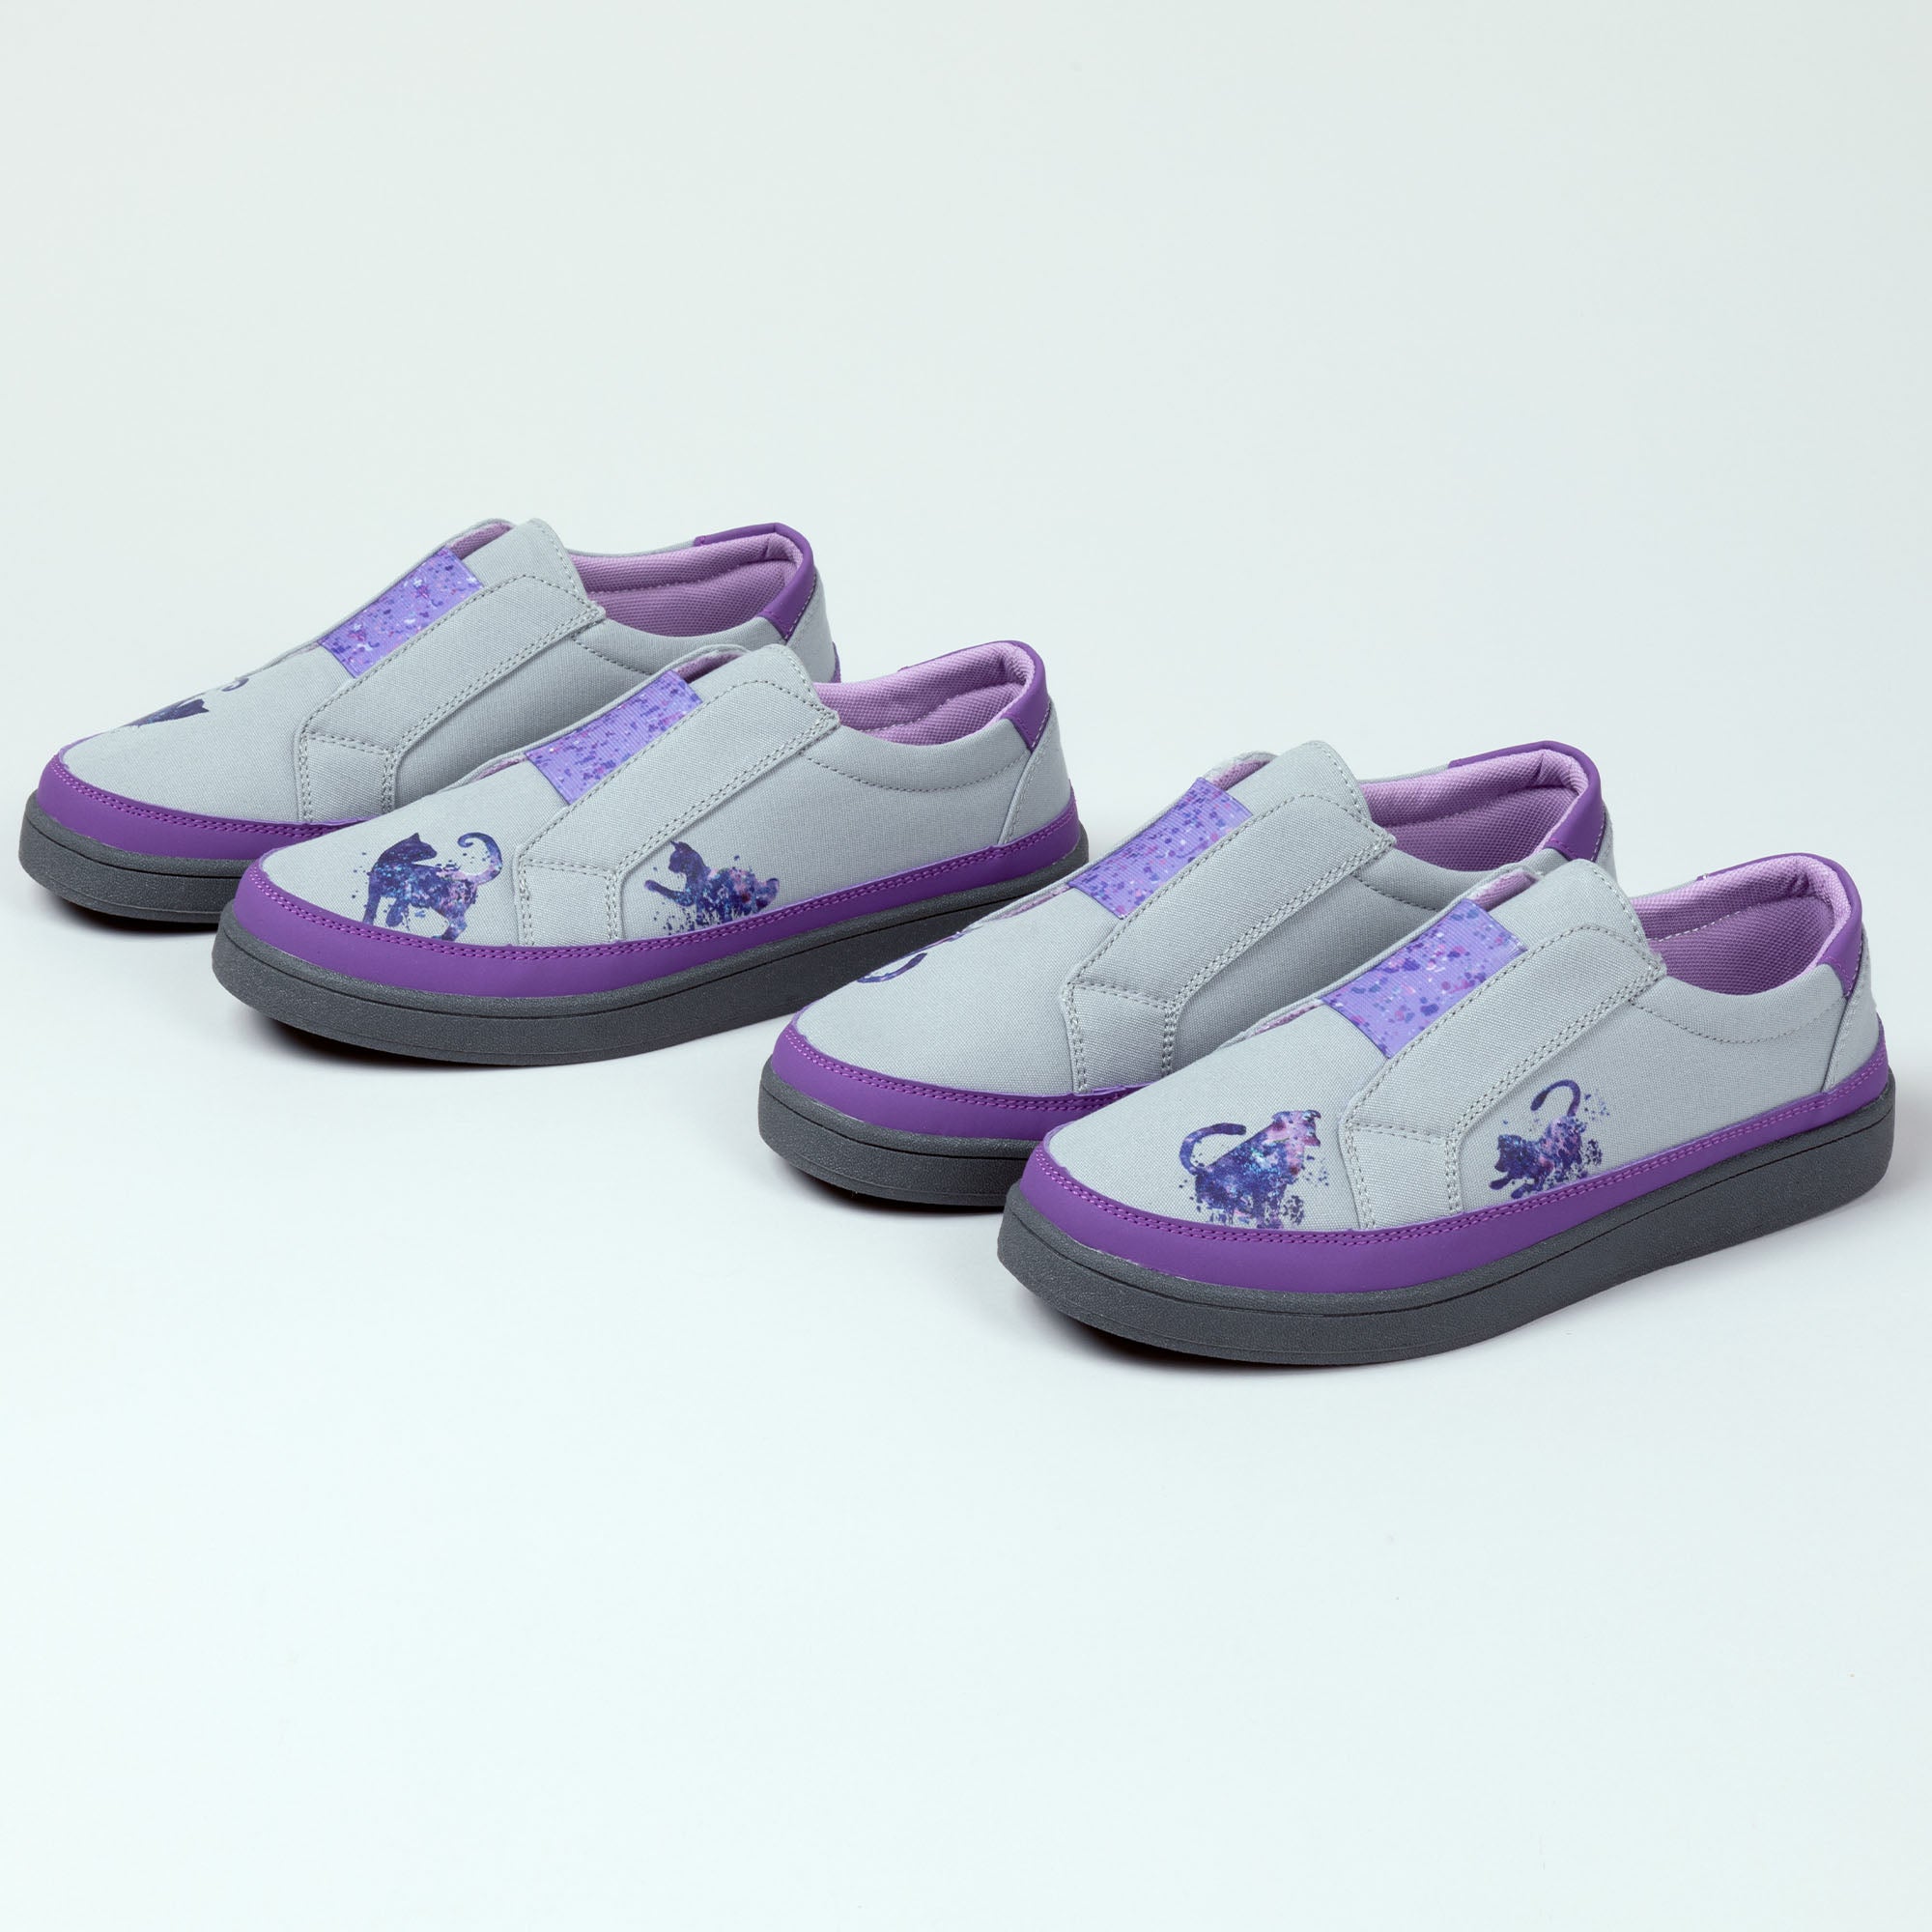 Playful Pets Slip-On Canvas Sneakers - Dog - 9